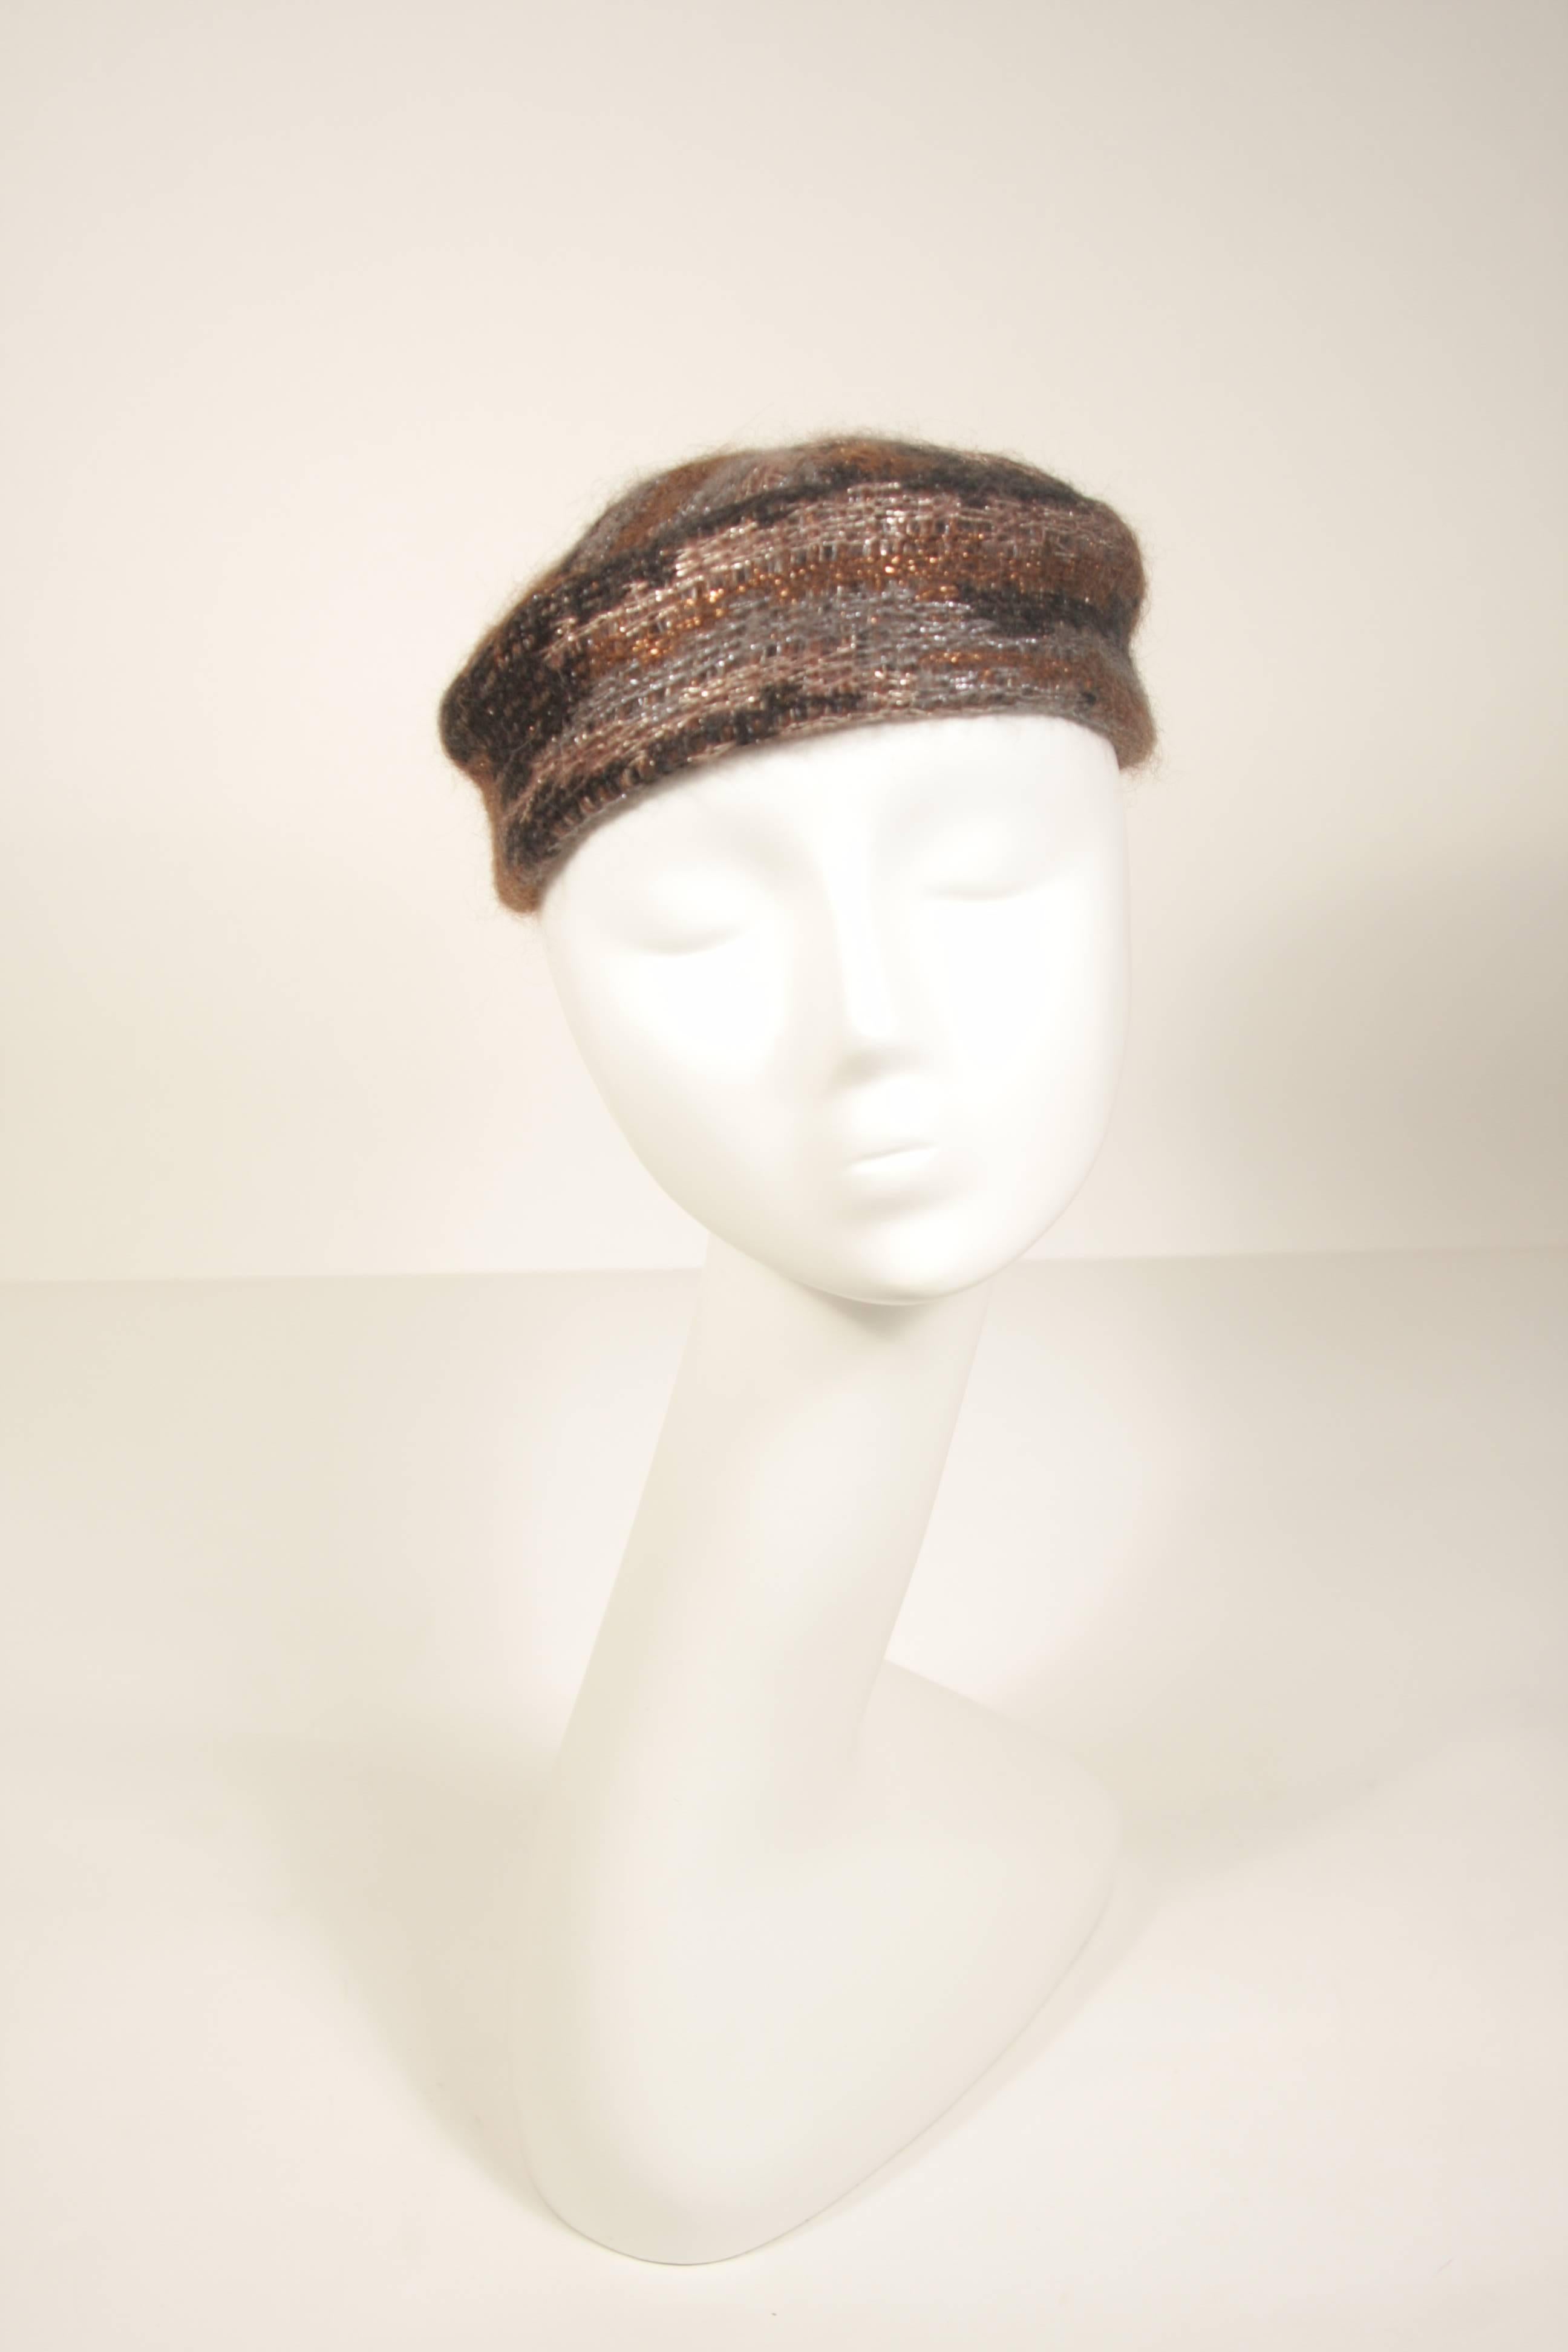 This Missoni design hat is composed of a Mohair blend in brown and grey hues with metallic accents. In excellent condition.

  **Please cross-reference measurements for personal accuracy. 

Measurements (Approximately)  
Circumference: 22